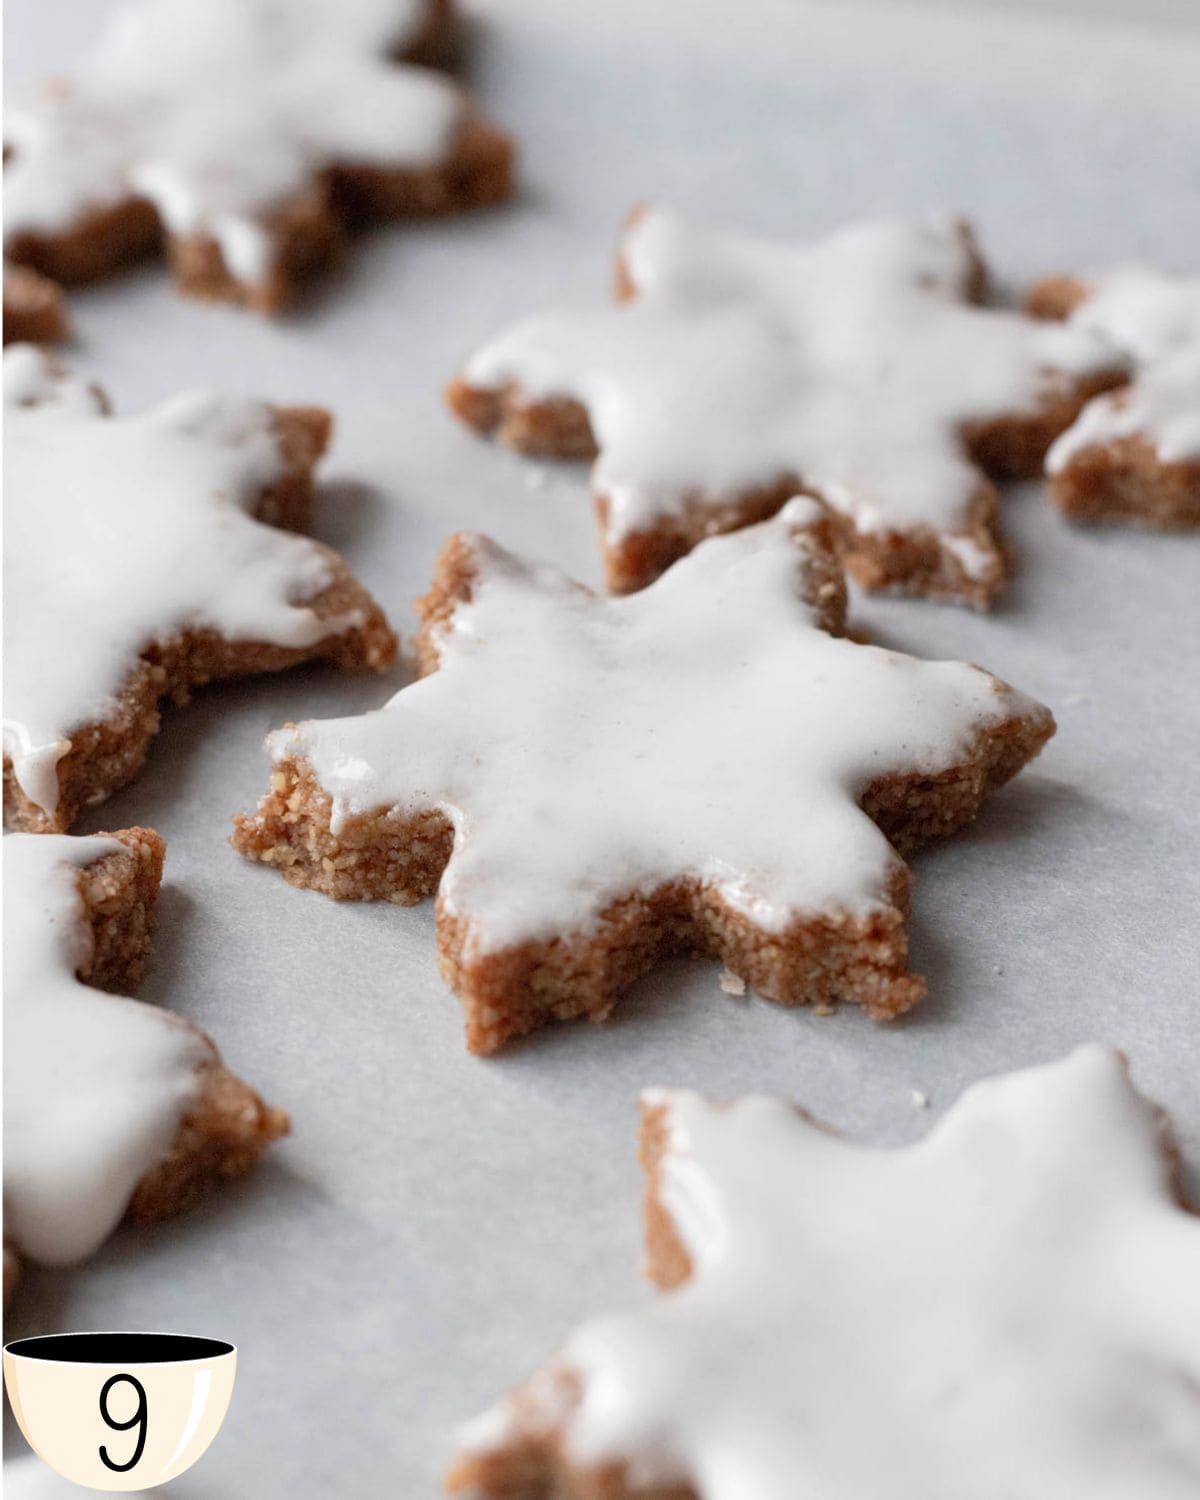 The finished vegan Zimtsterne cookies with a white glaze on top, freshly baked and set on parchment paper, displaying the classic appearance of this Swiss Christmas treat.